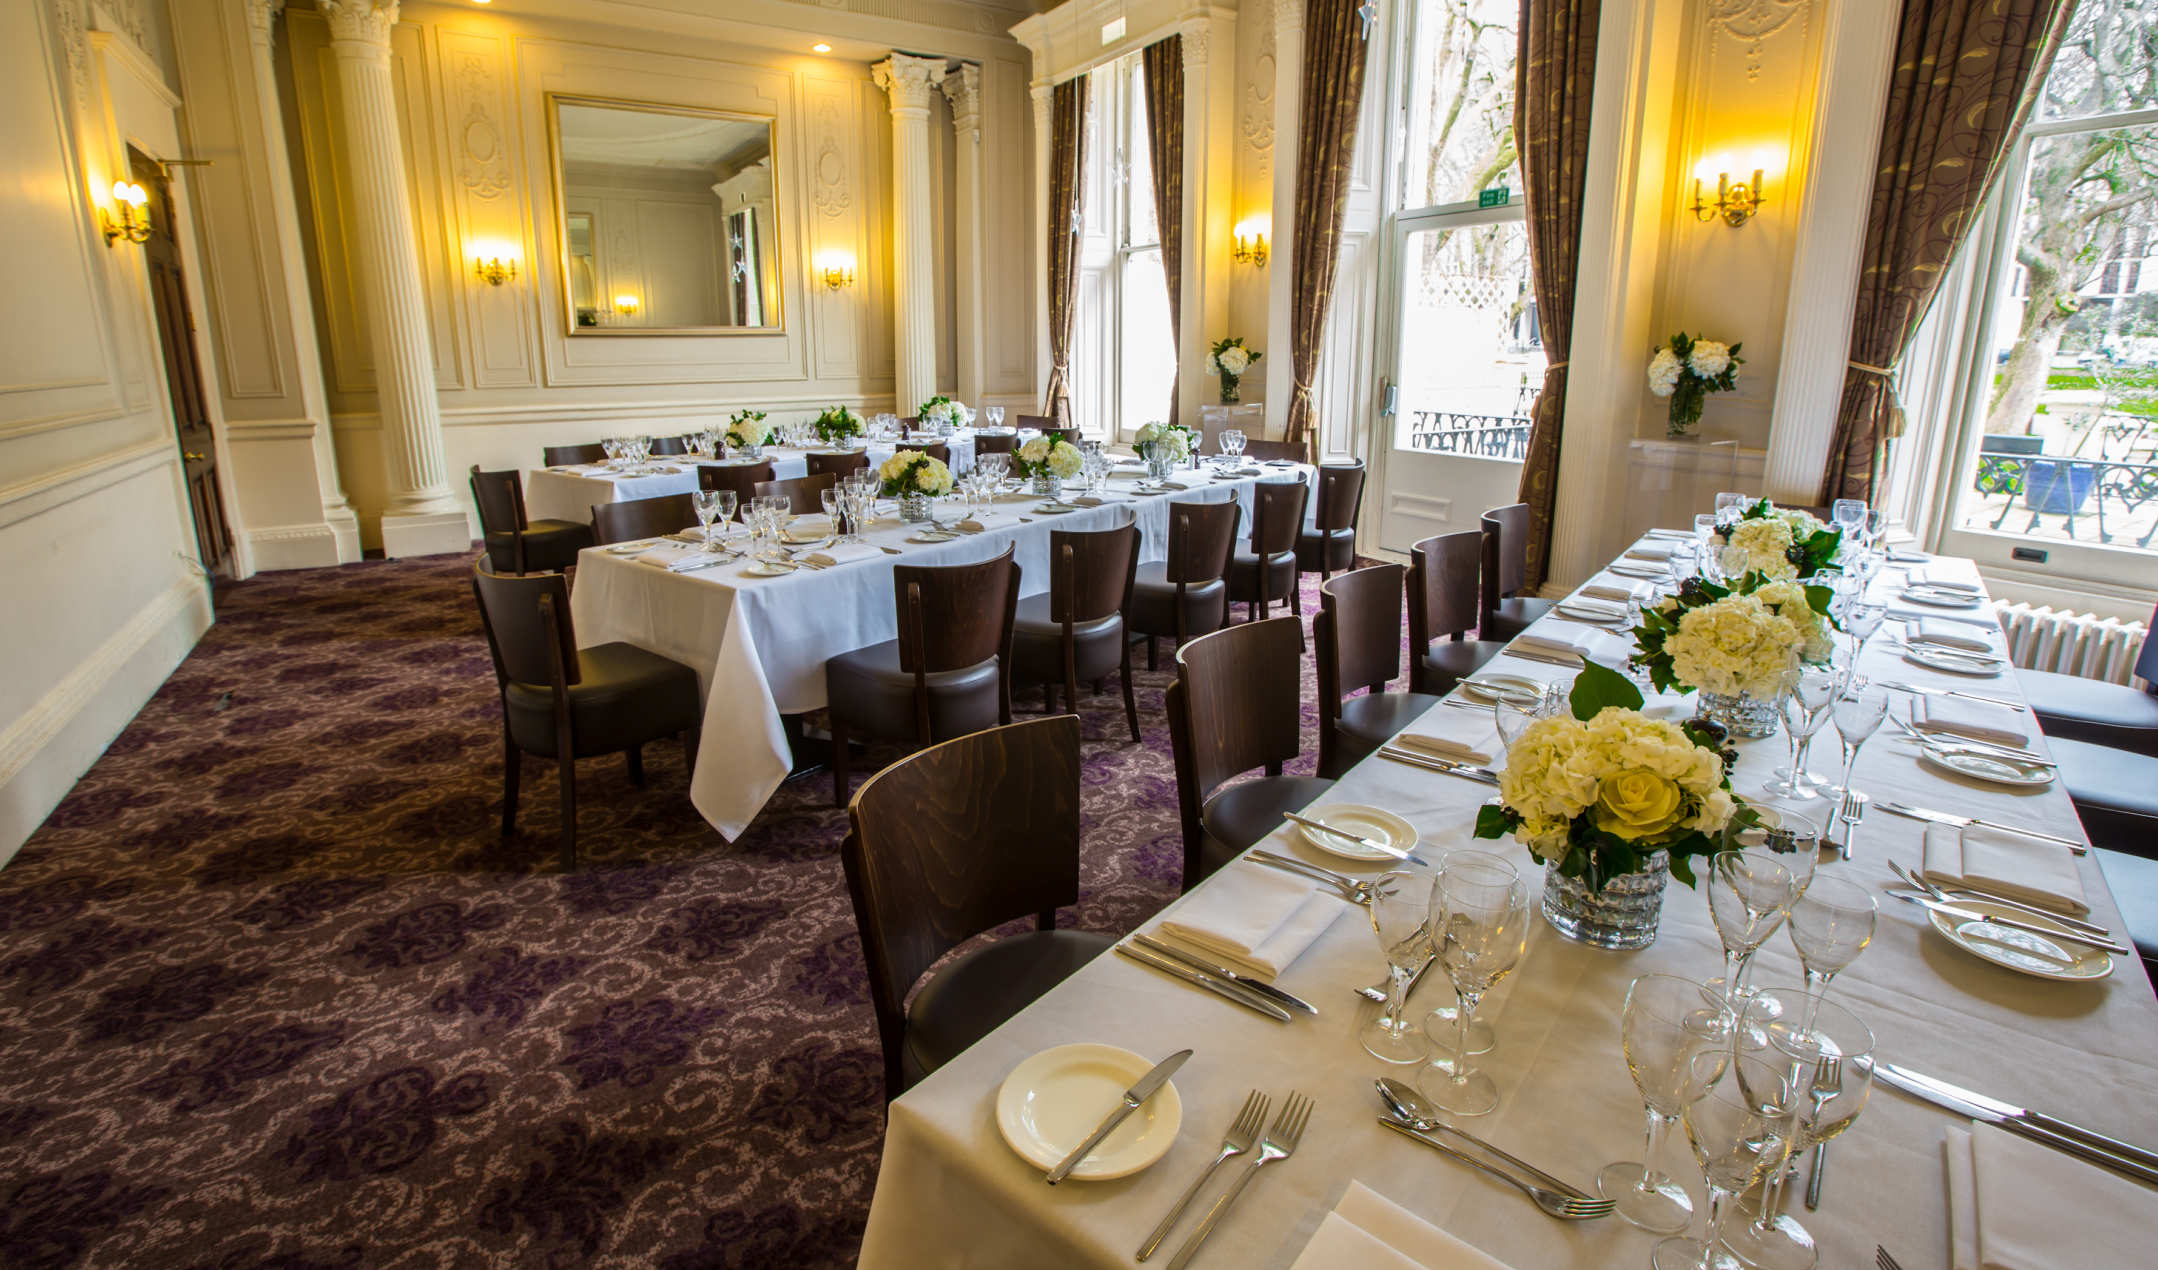 The Garden Room Restaurant Administration And Support Services Imperial College London